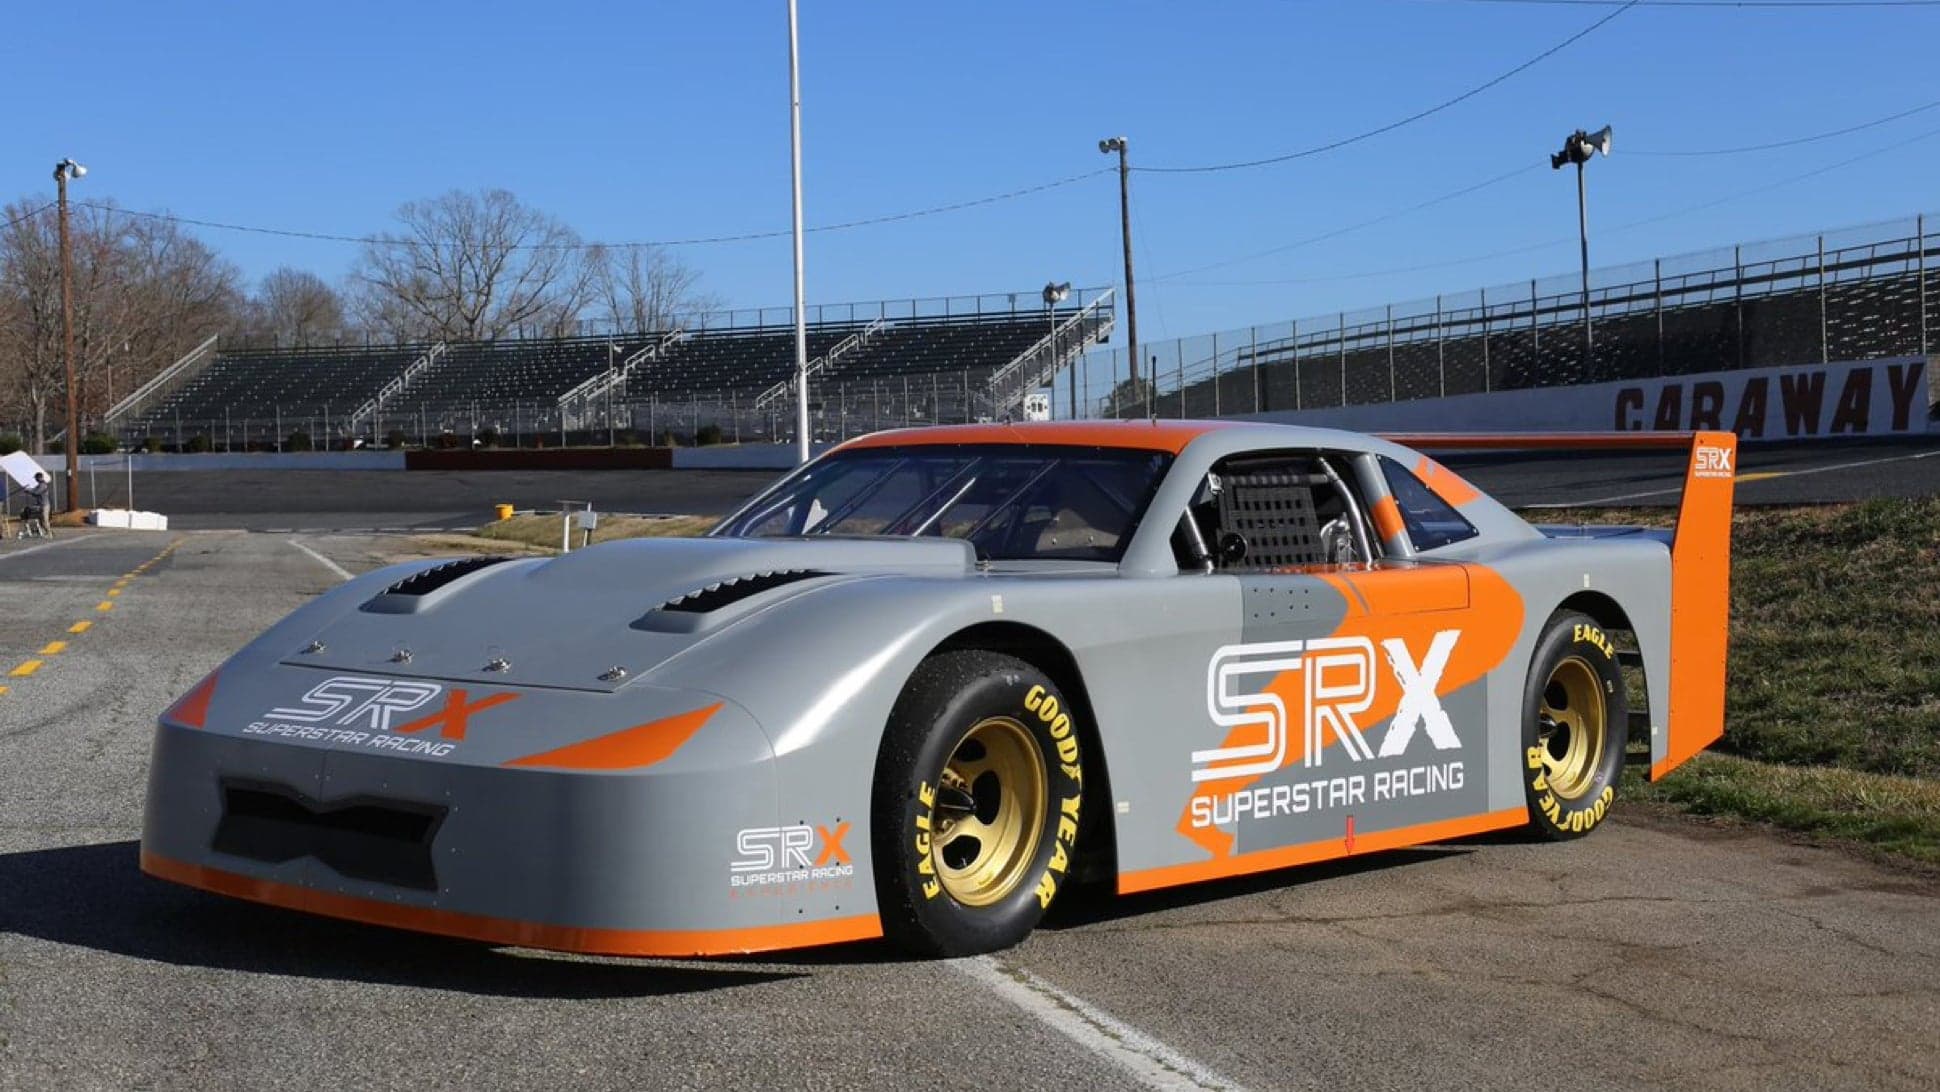 This Is the Car for Tony Stewart’s New IROC-Like All-Star Racing Series